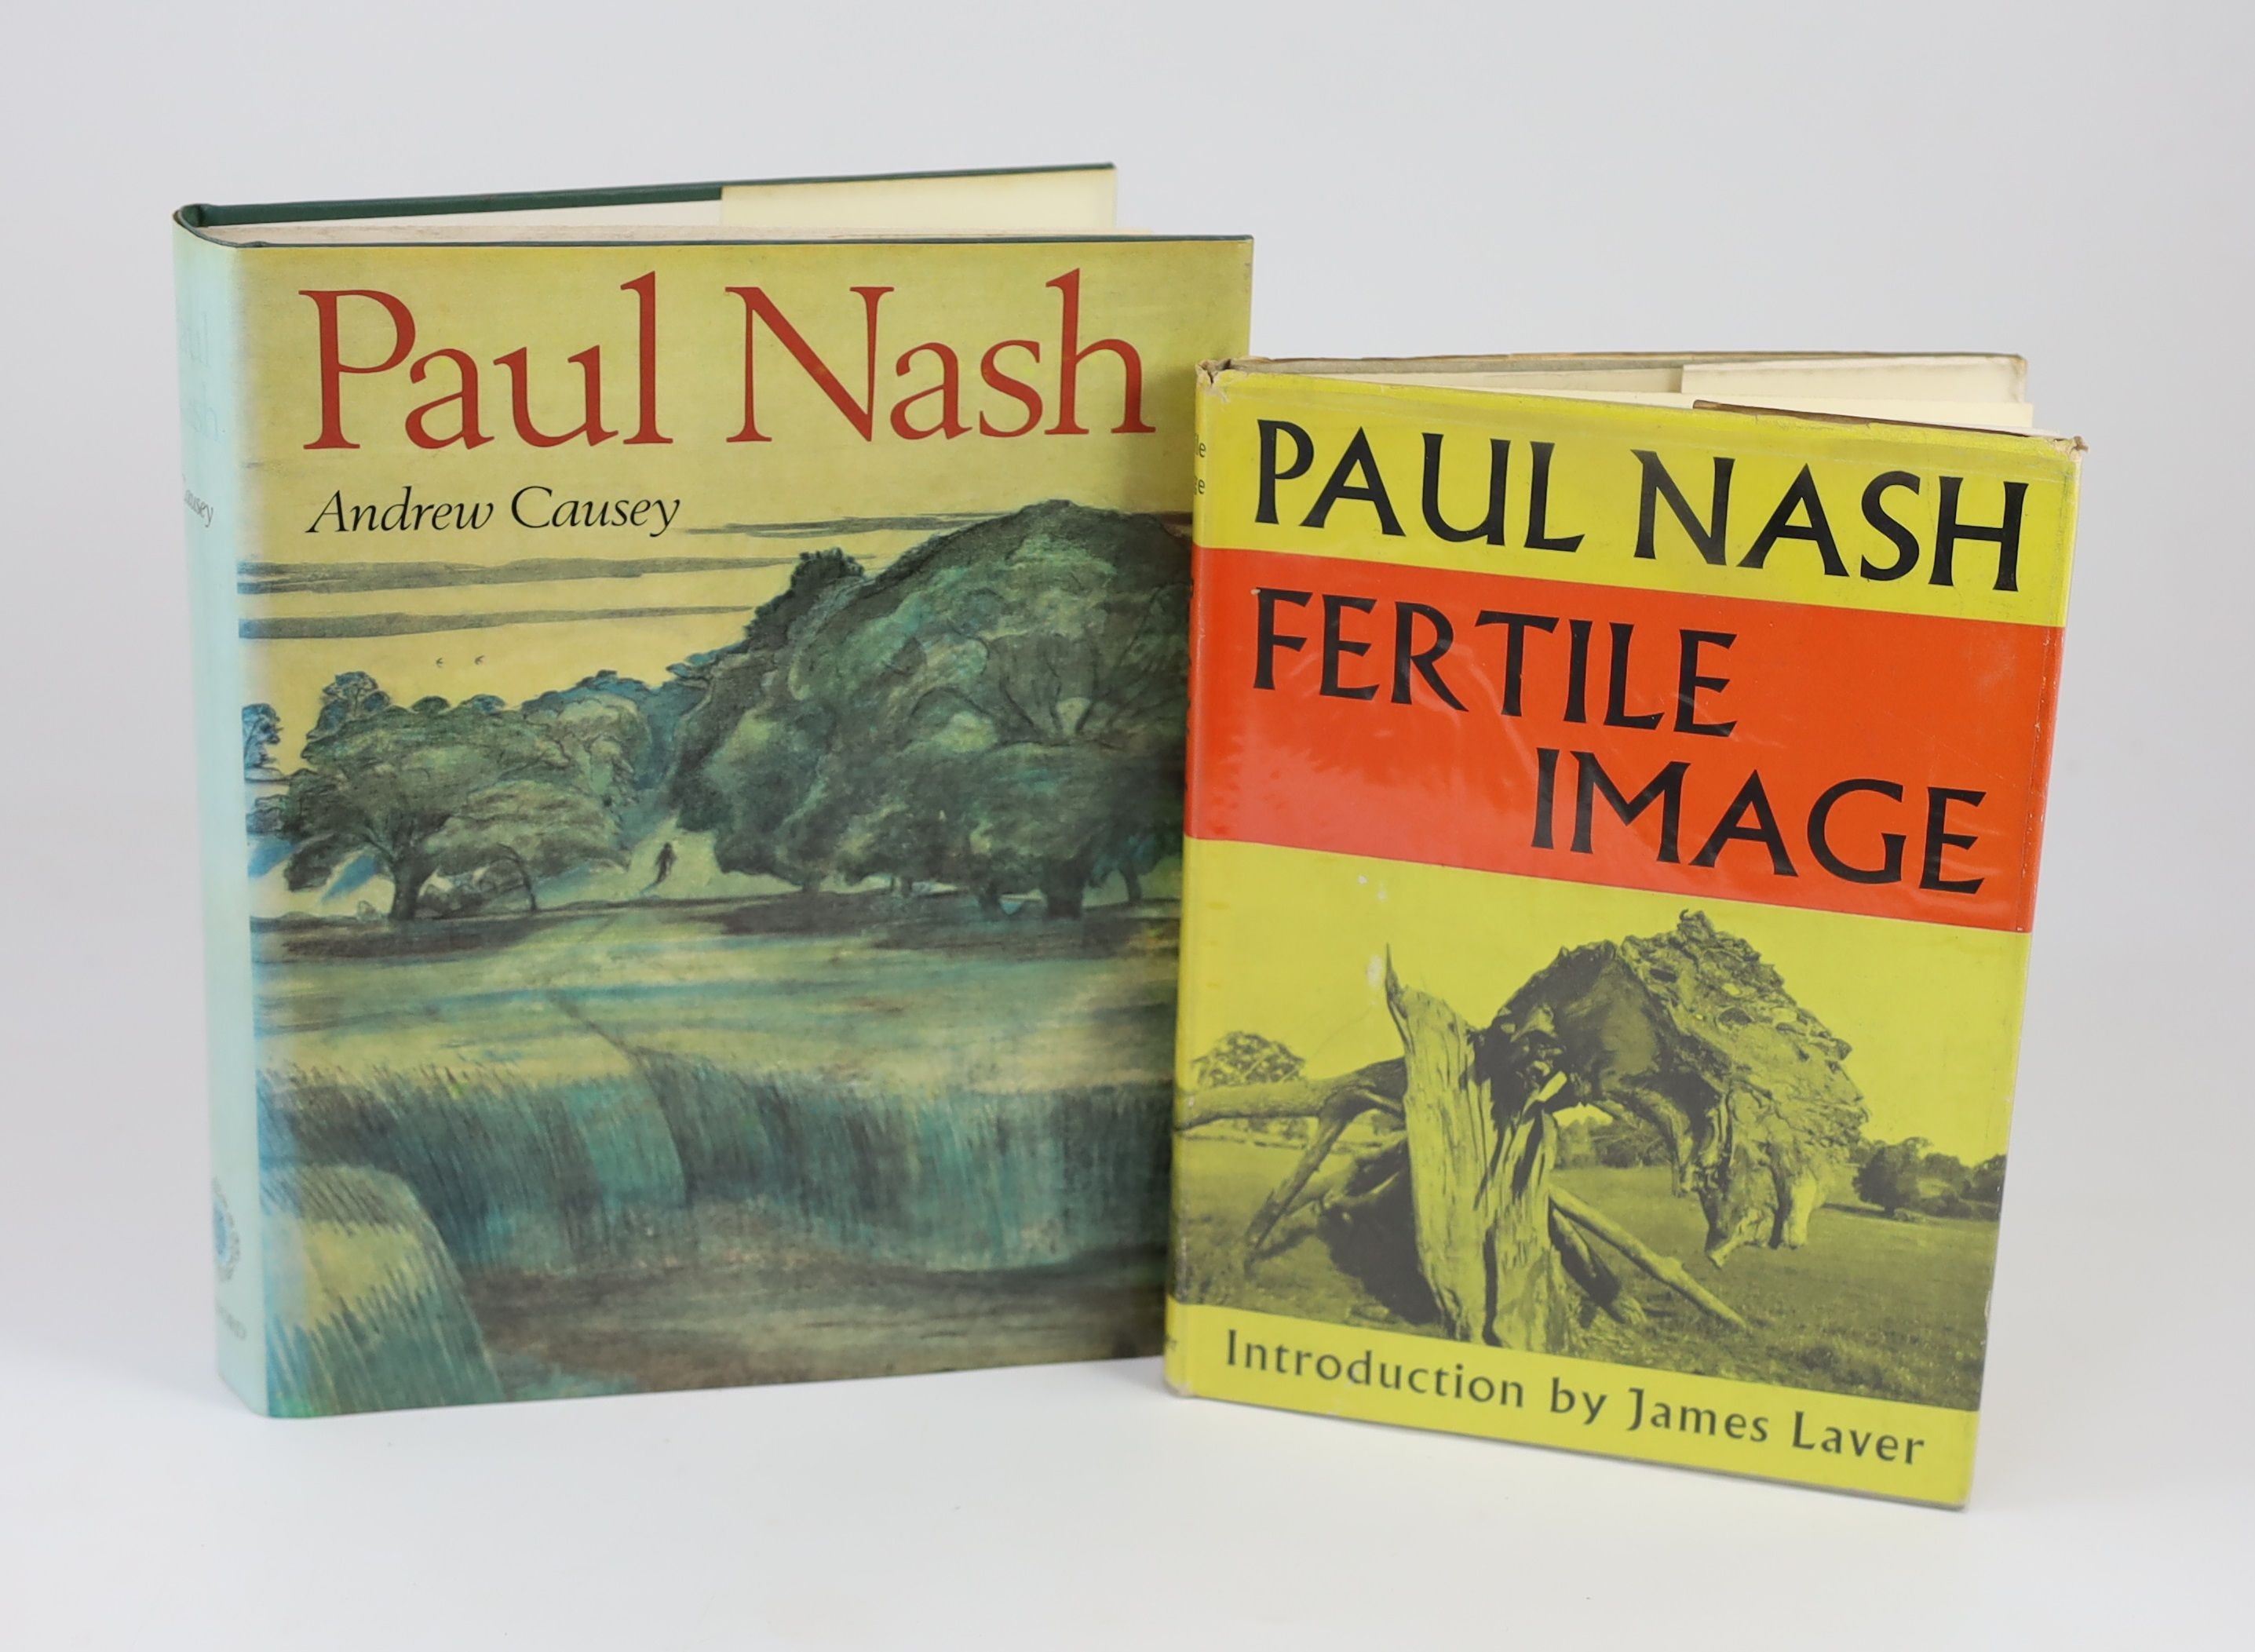 Causey, Andrew - Paul Nash. Adorned with numerous illustration, coloured and black and white. Publishers cloth with gilt letters on spine, original dust jacket. 4to. Clarendon Press, Oxford, 1980., slight rubbing to cove